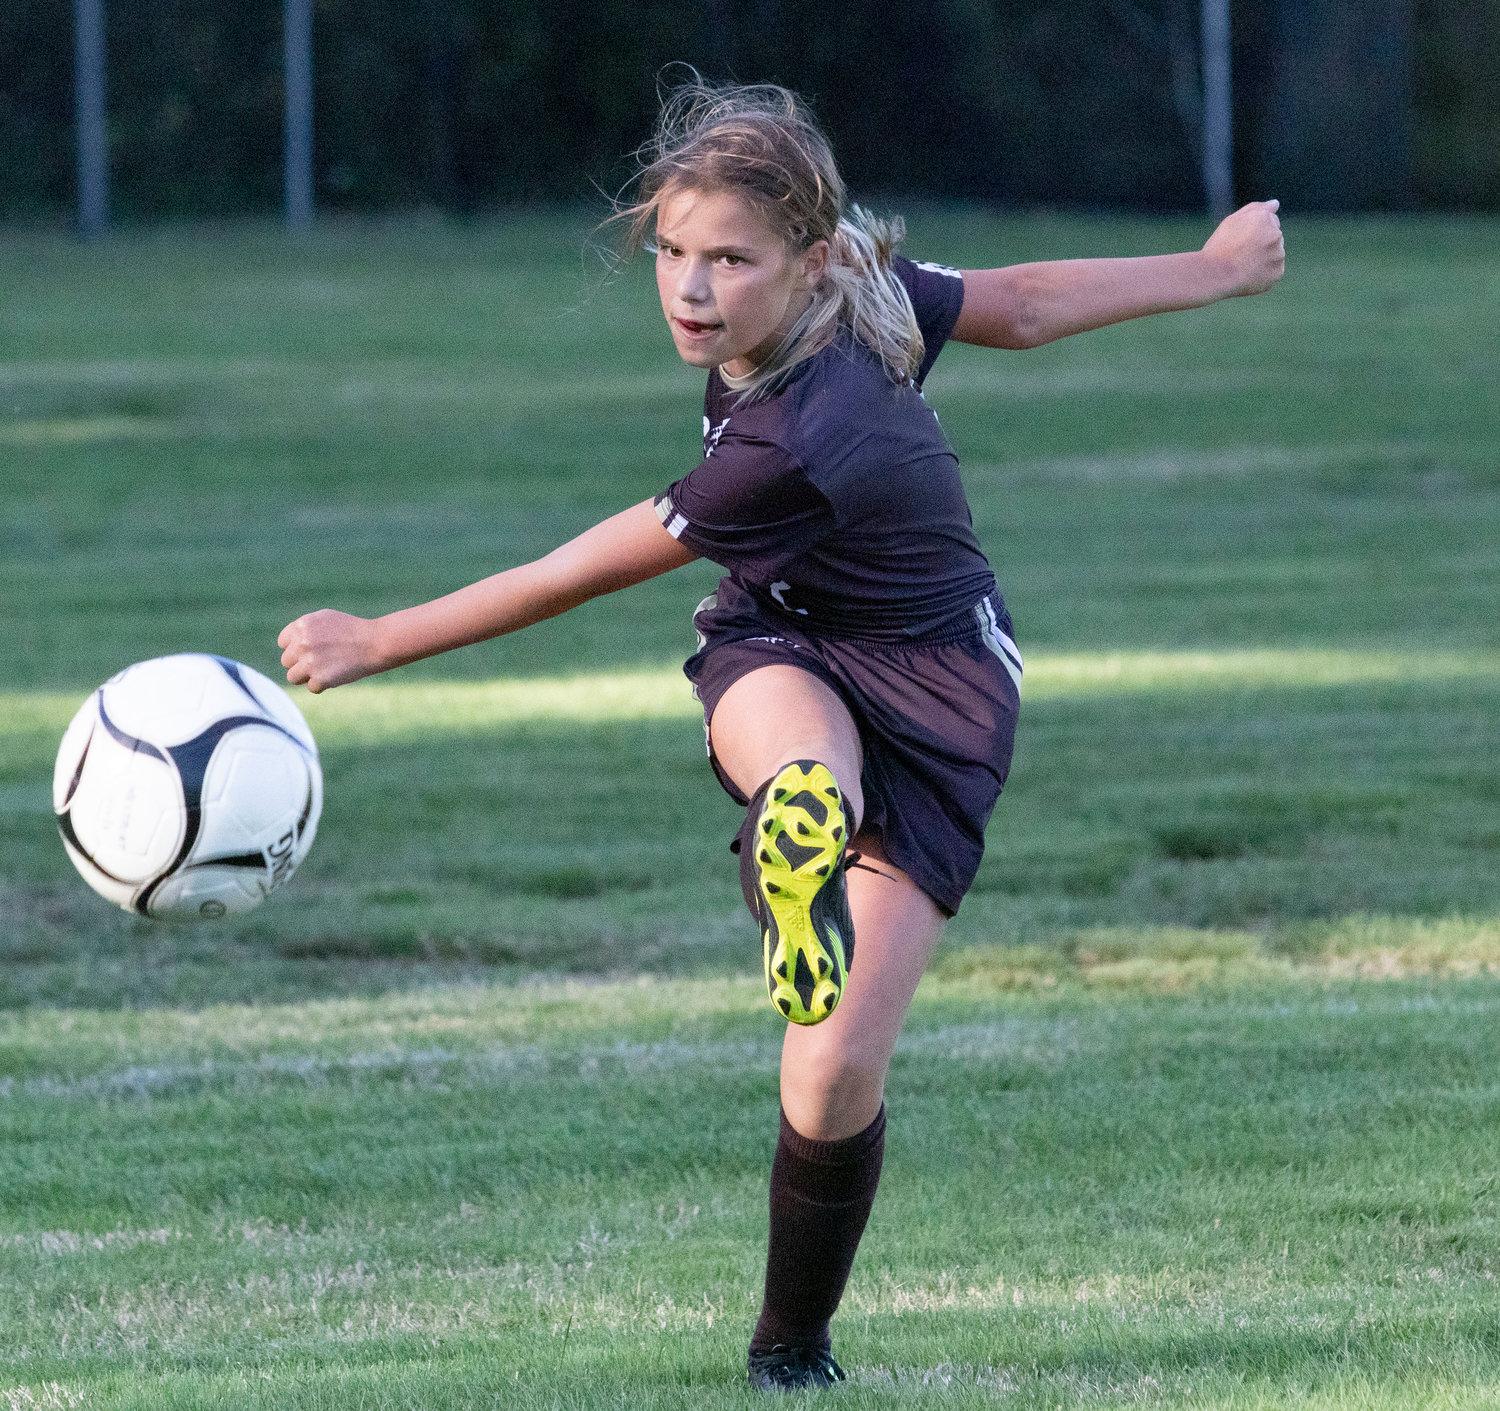 Eight grader defender Jacqueline Jusseaume clears the ball out of the Wildcats box. The young Wildcat has impressed her teammates with her play this season.